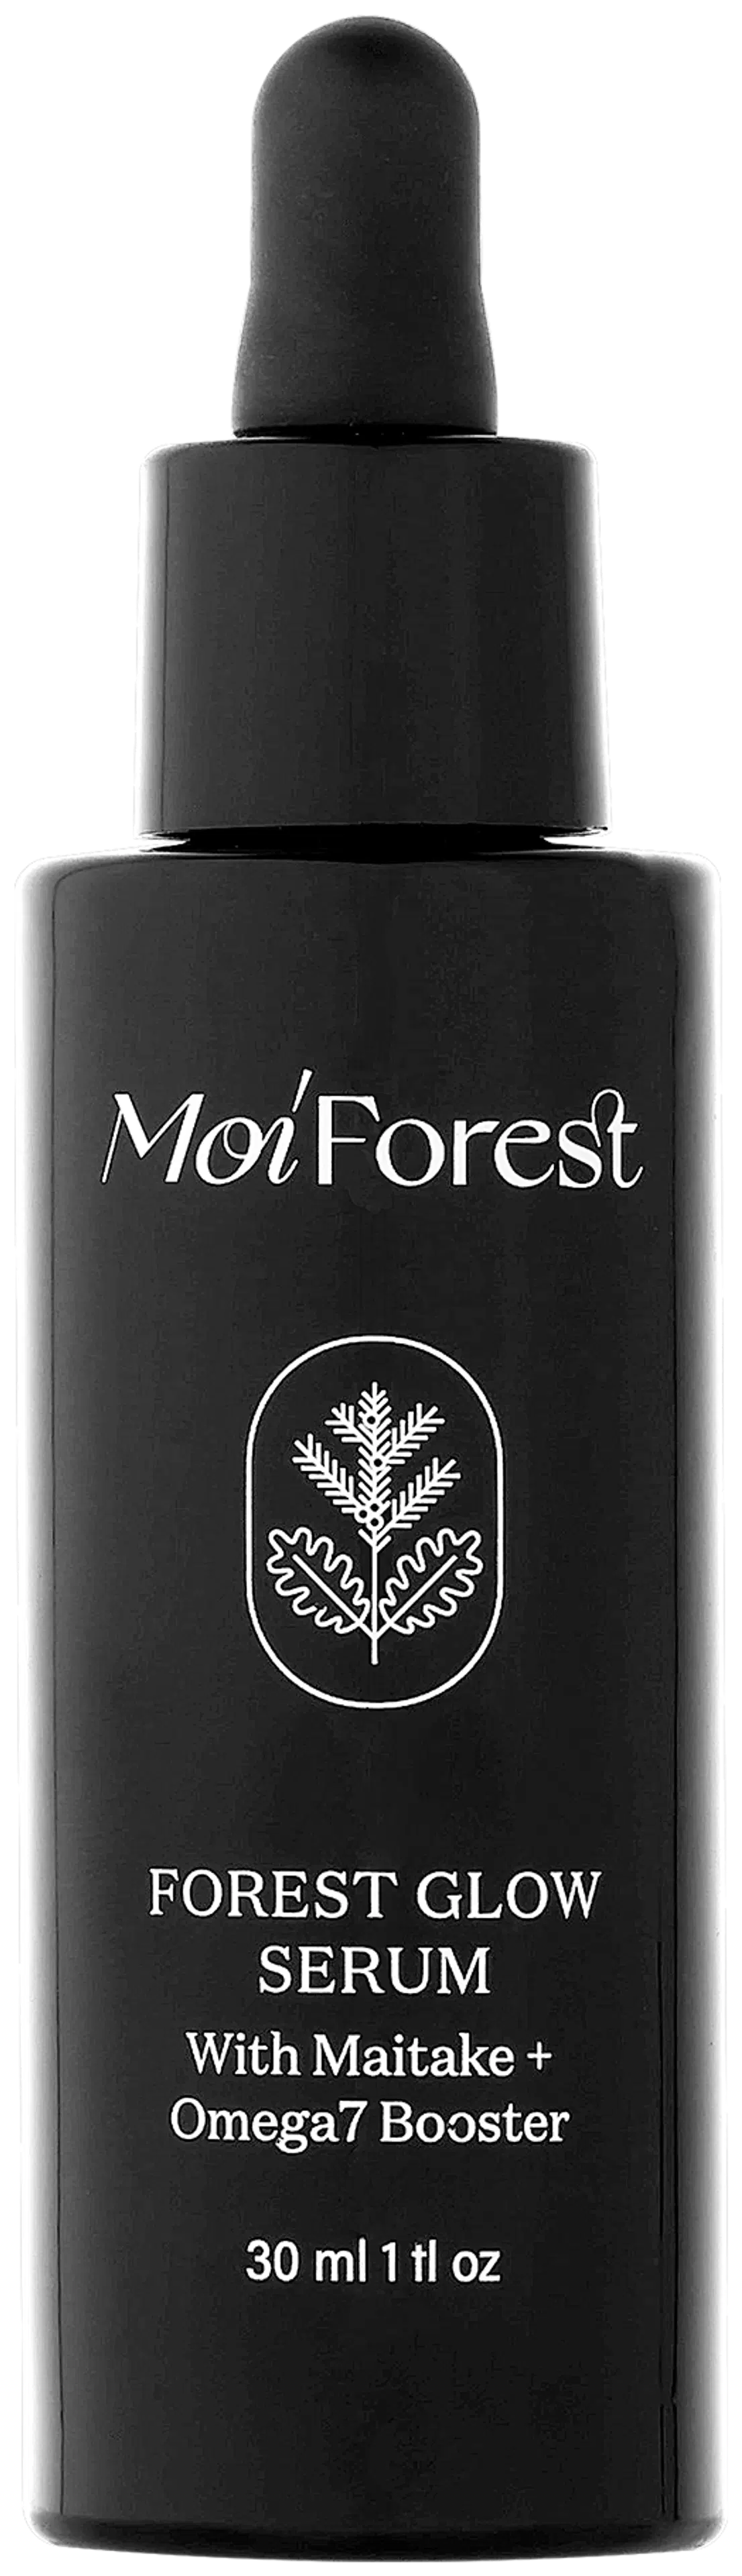 Moi Forest Forest Glow Seruumi 30 ml